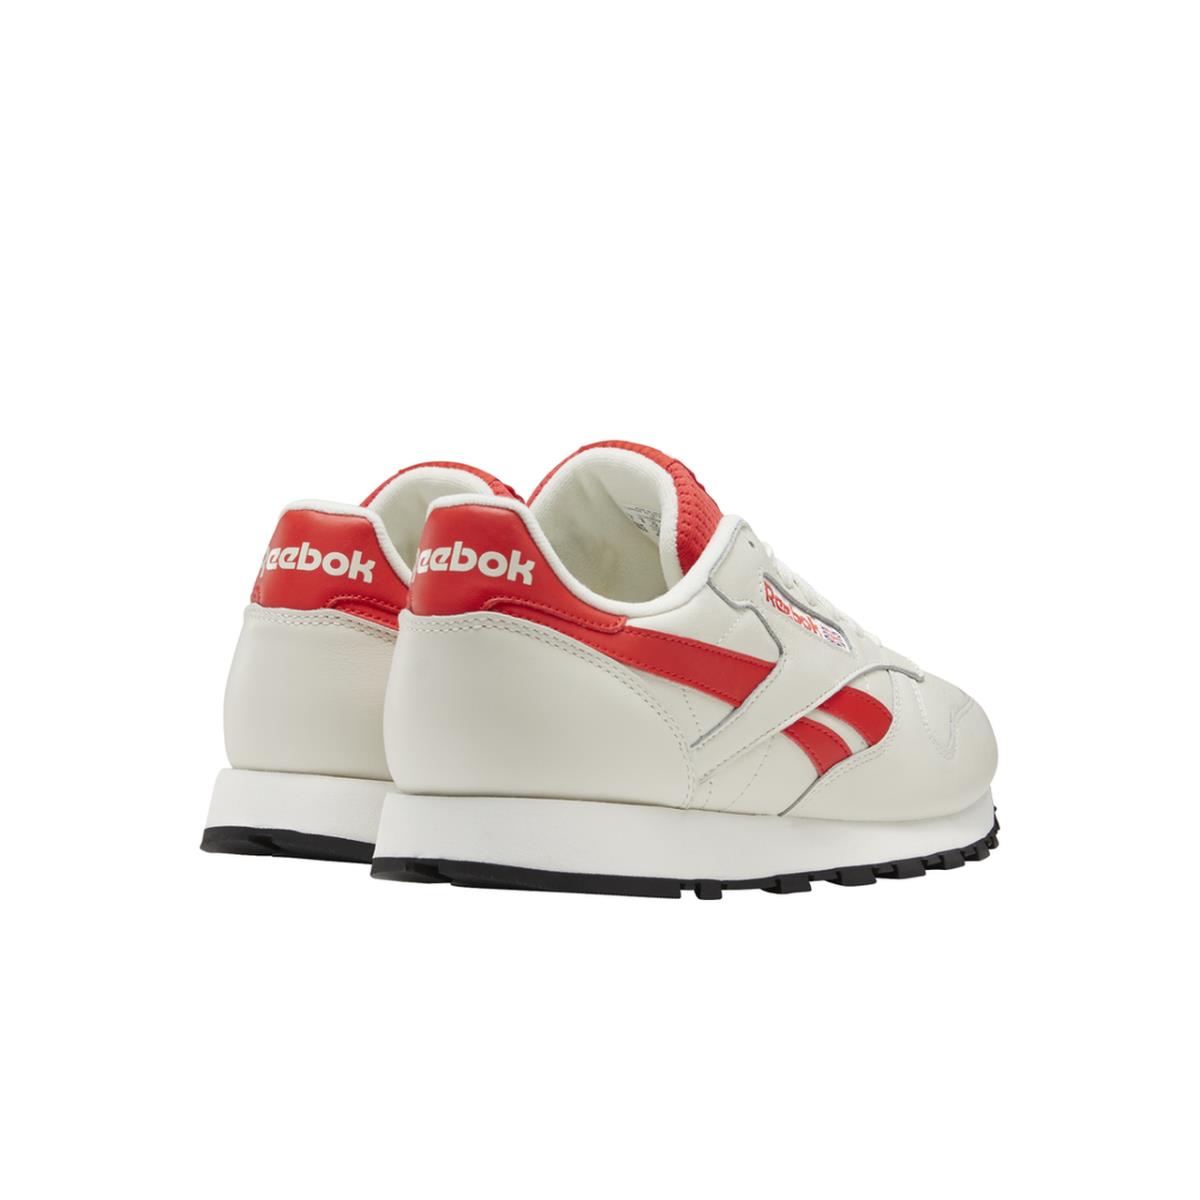 Reebok shoes Classic Leather - Chalk/Rad Red 4